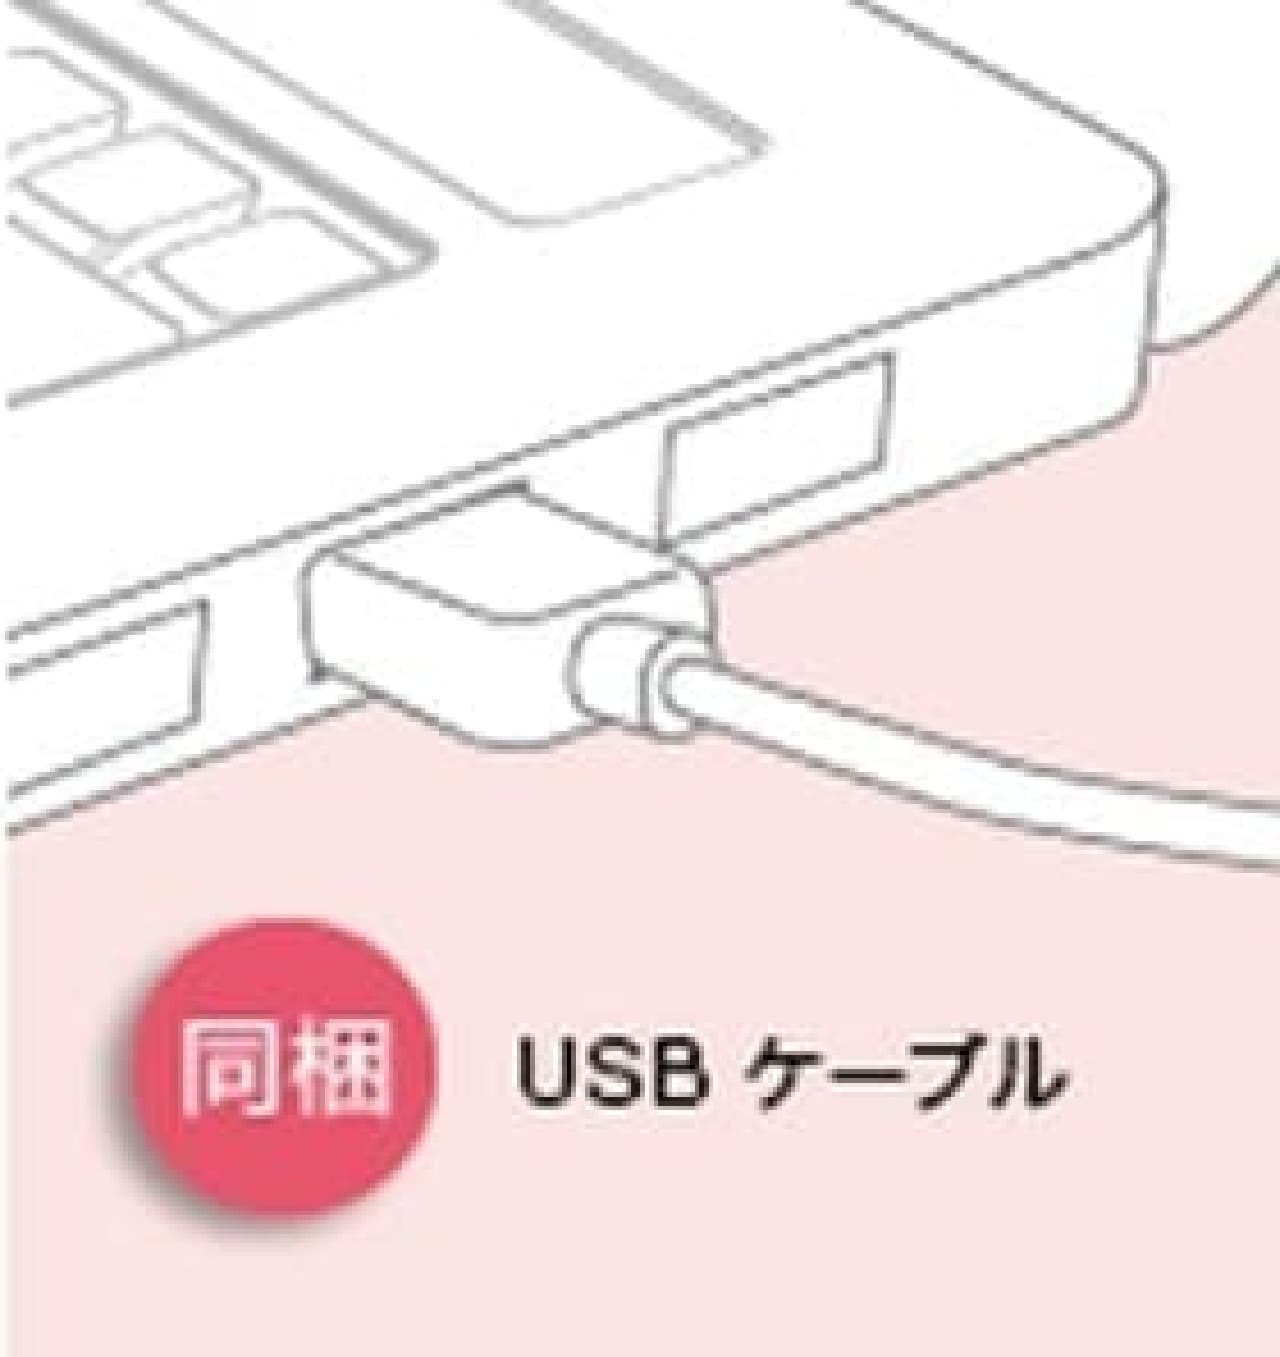 Also active in the office if you use a USB cable